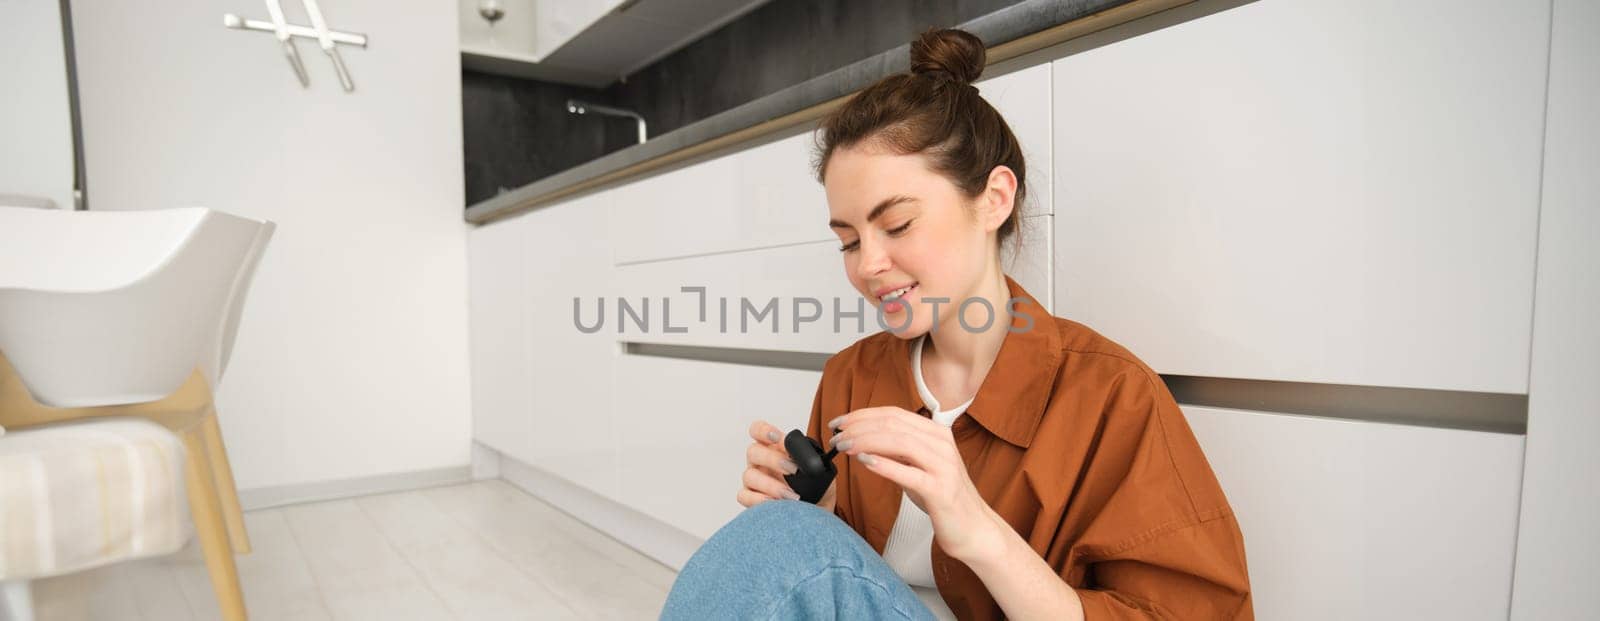 Portrait of young smiling woman, girl puts on her black wireless headphones, listens to music in earphones, sits on kitchen floor at home.